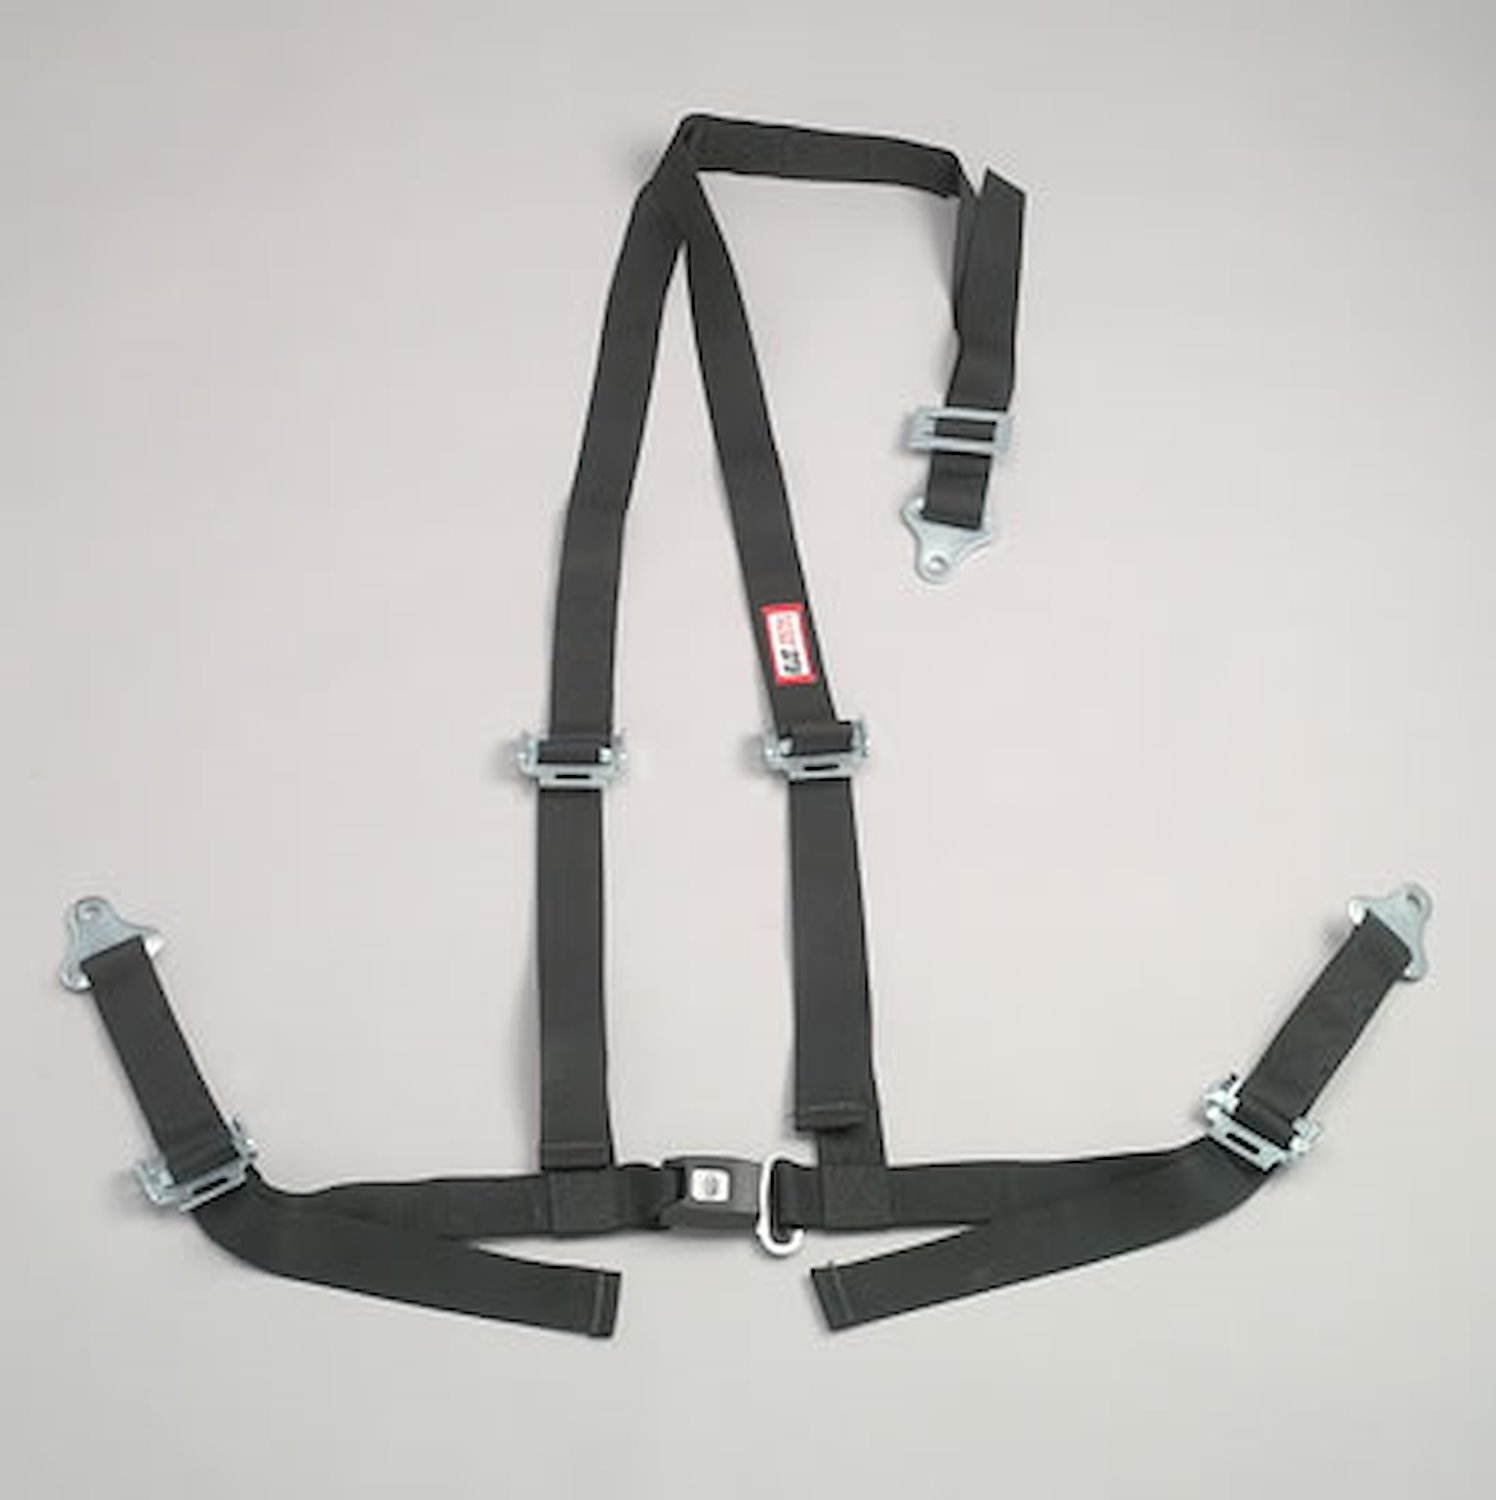 NON-SFI B&T HARNESS 2 PULL UP Lap Belt SNAP 2 S. H. Individual ROLL BAR Mount WRAP/BOLT RED